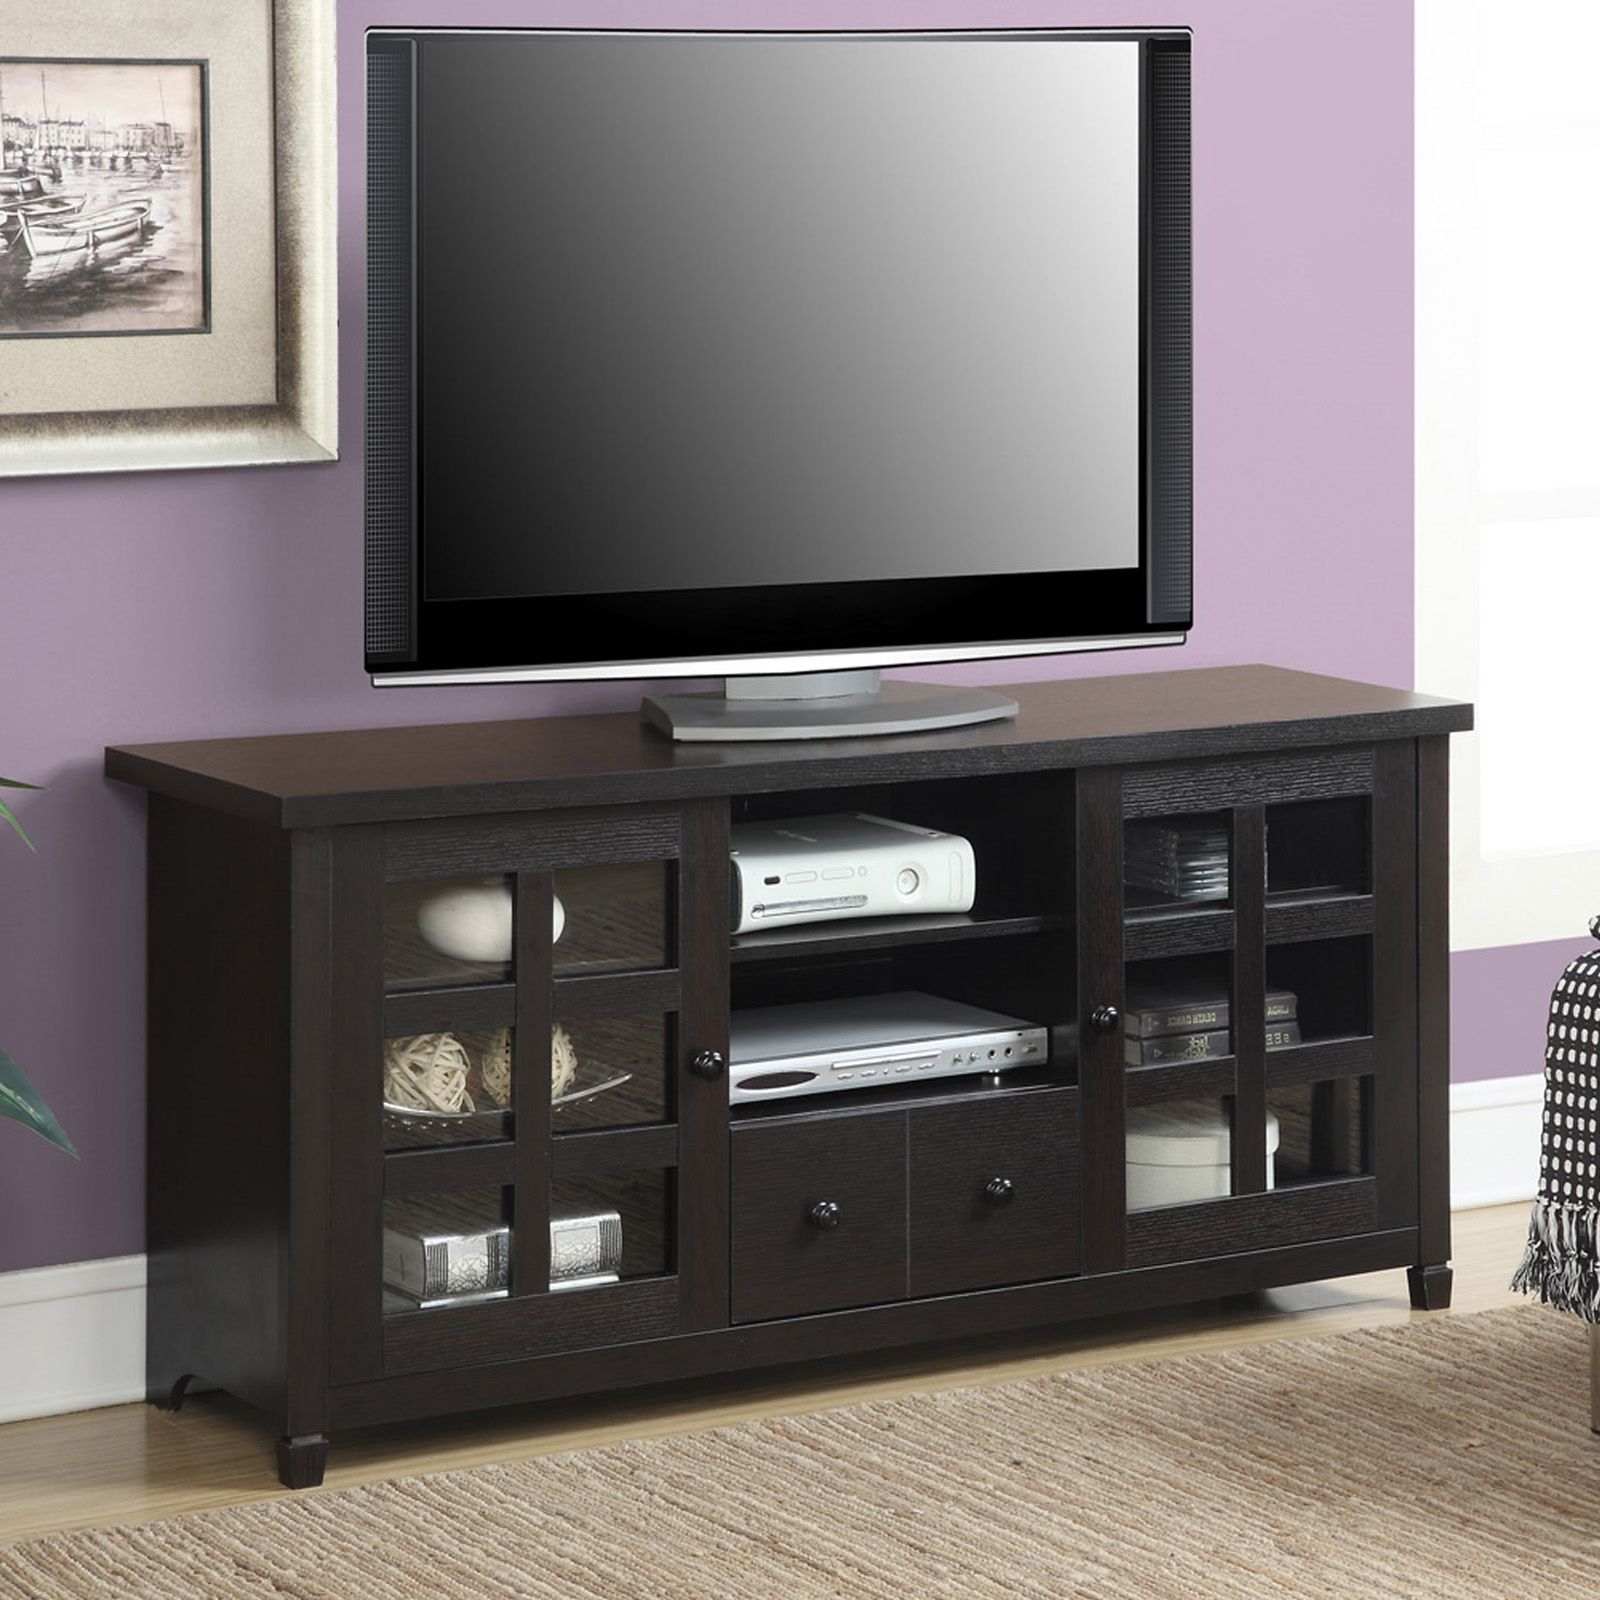 Convenience Concepts Newport Huntington Tv Stand – Tv Within Convenience Concepts Newport Marbella 60" Tv Stands (Gallery 5 of 20)